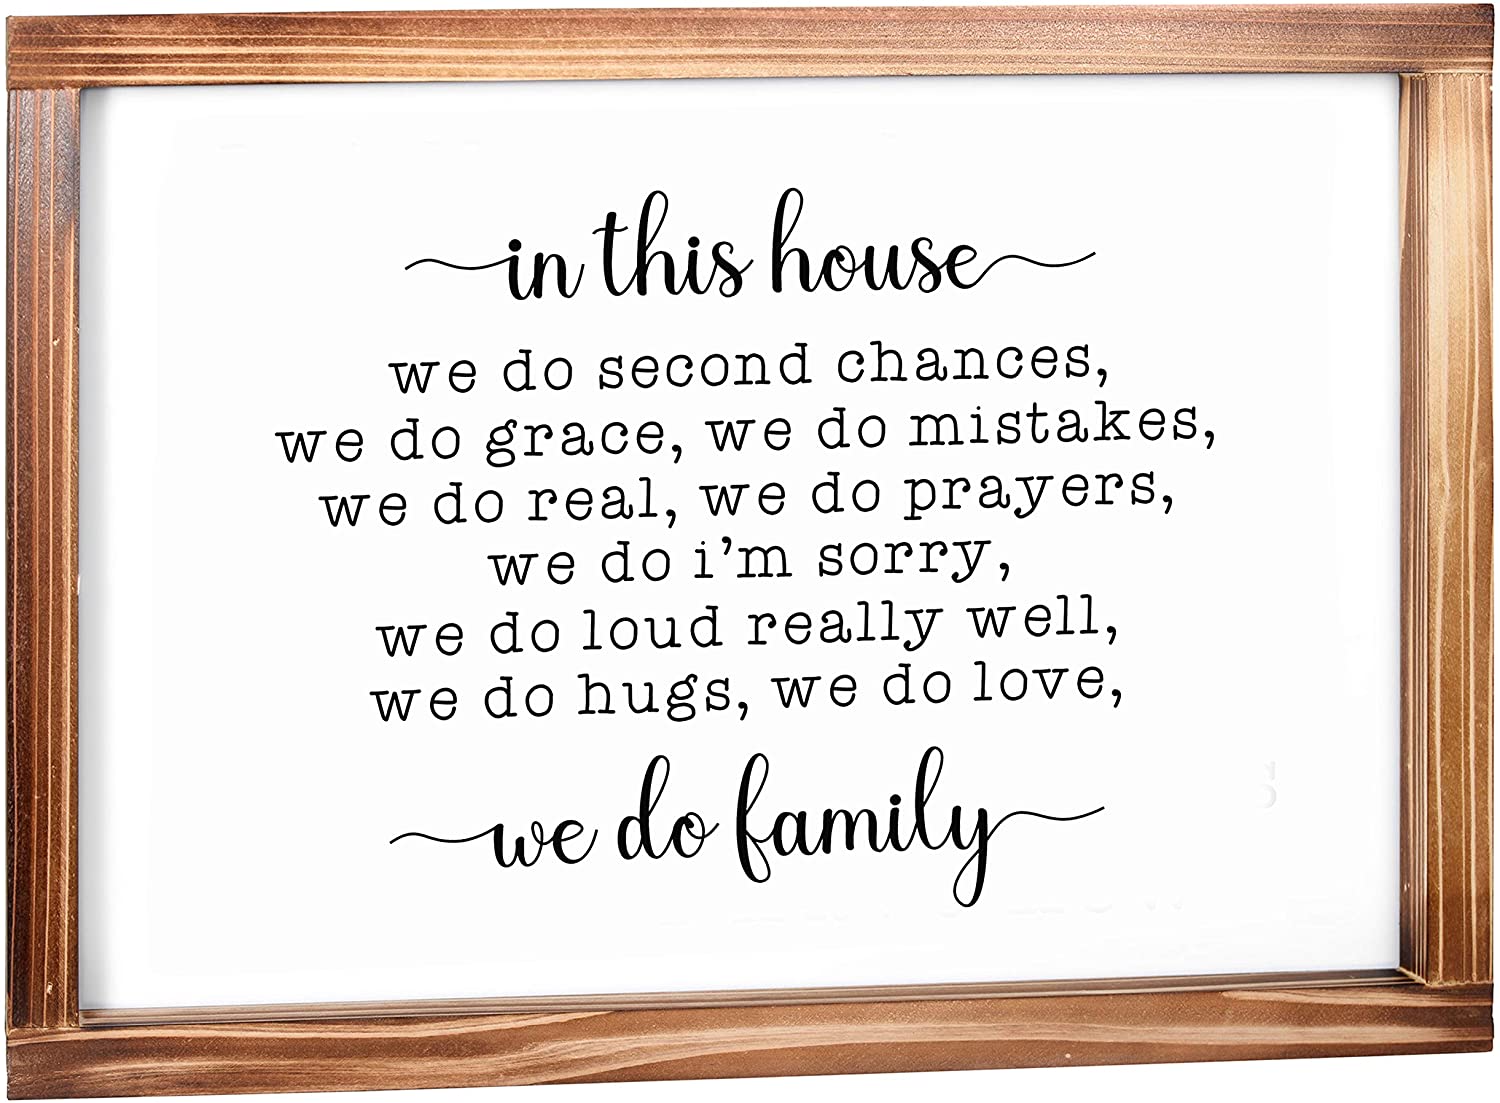 In This House We Do Family Sign - Family Signs for Home Decor, Rustic Farmhouse Decor for the Home Sign -Wall Decorations for Living Room, Modern Farmhouse Sign with Solid Wood Frame -11 x 16 Inches